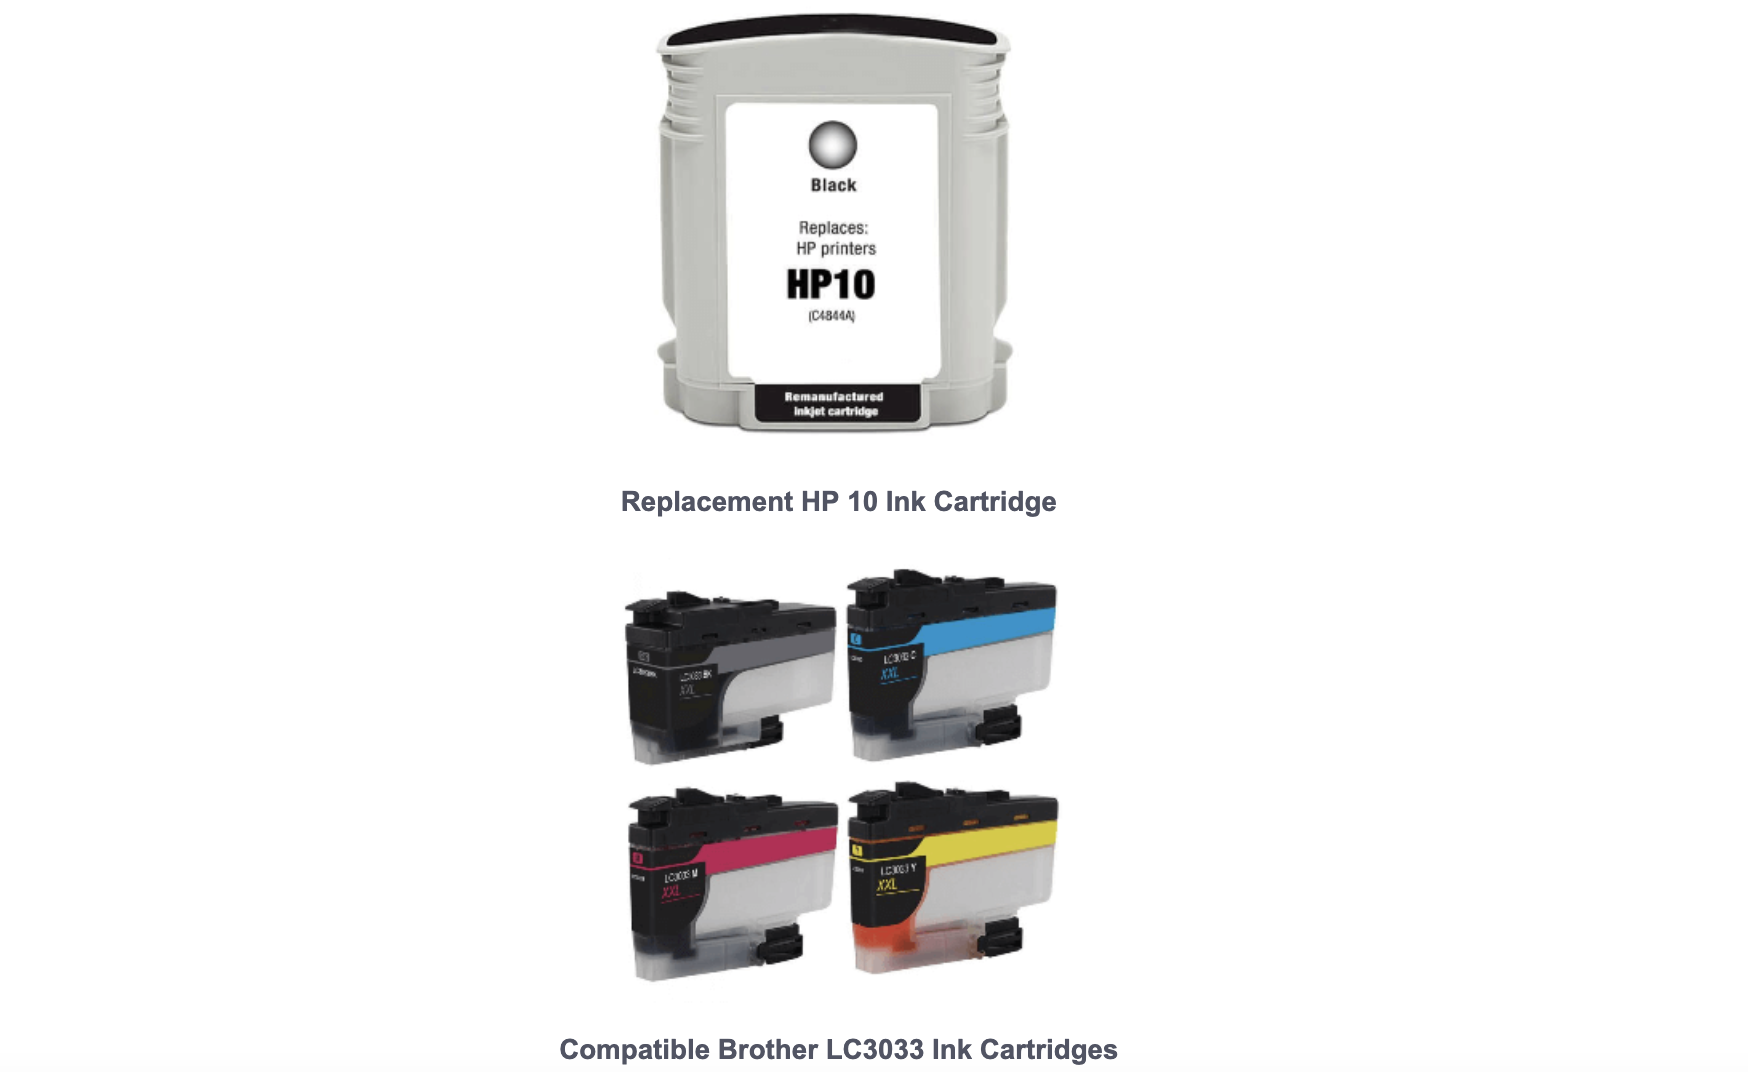 replacement ink cartridges